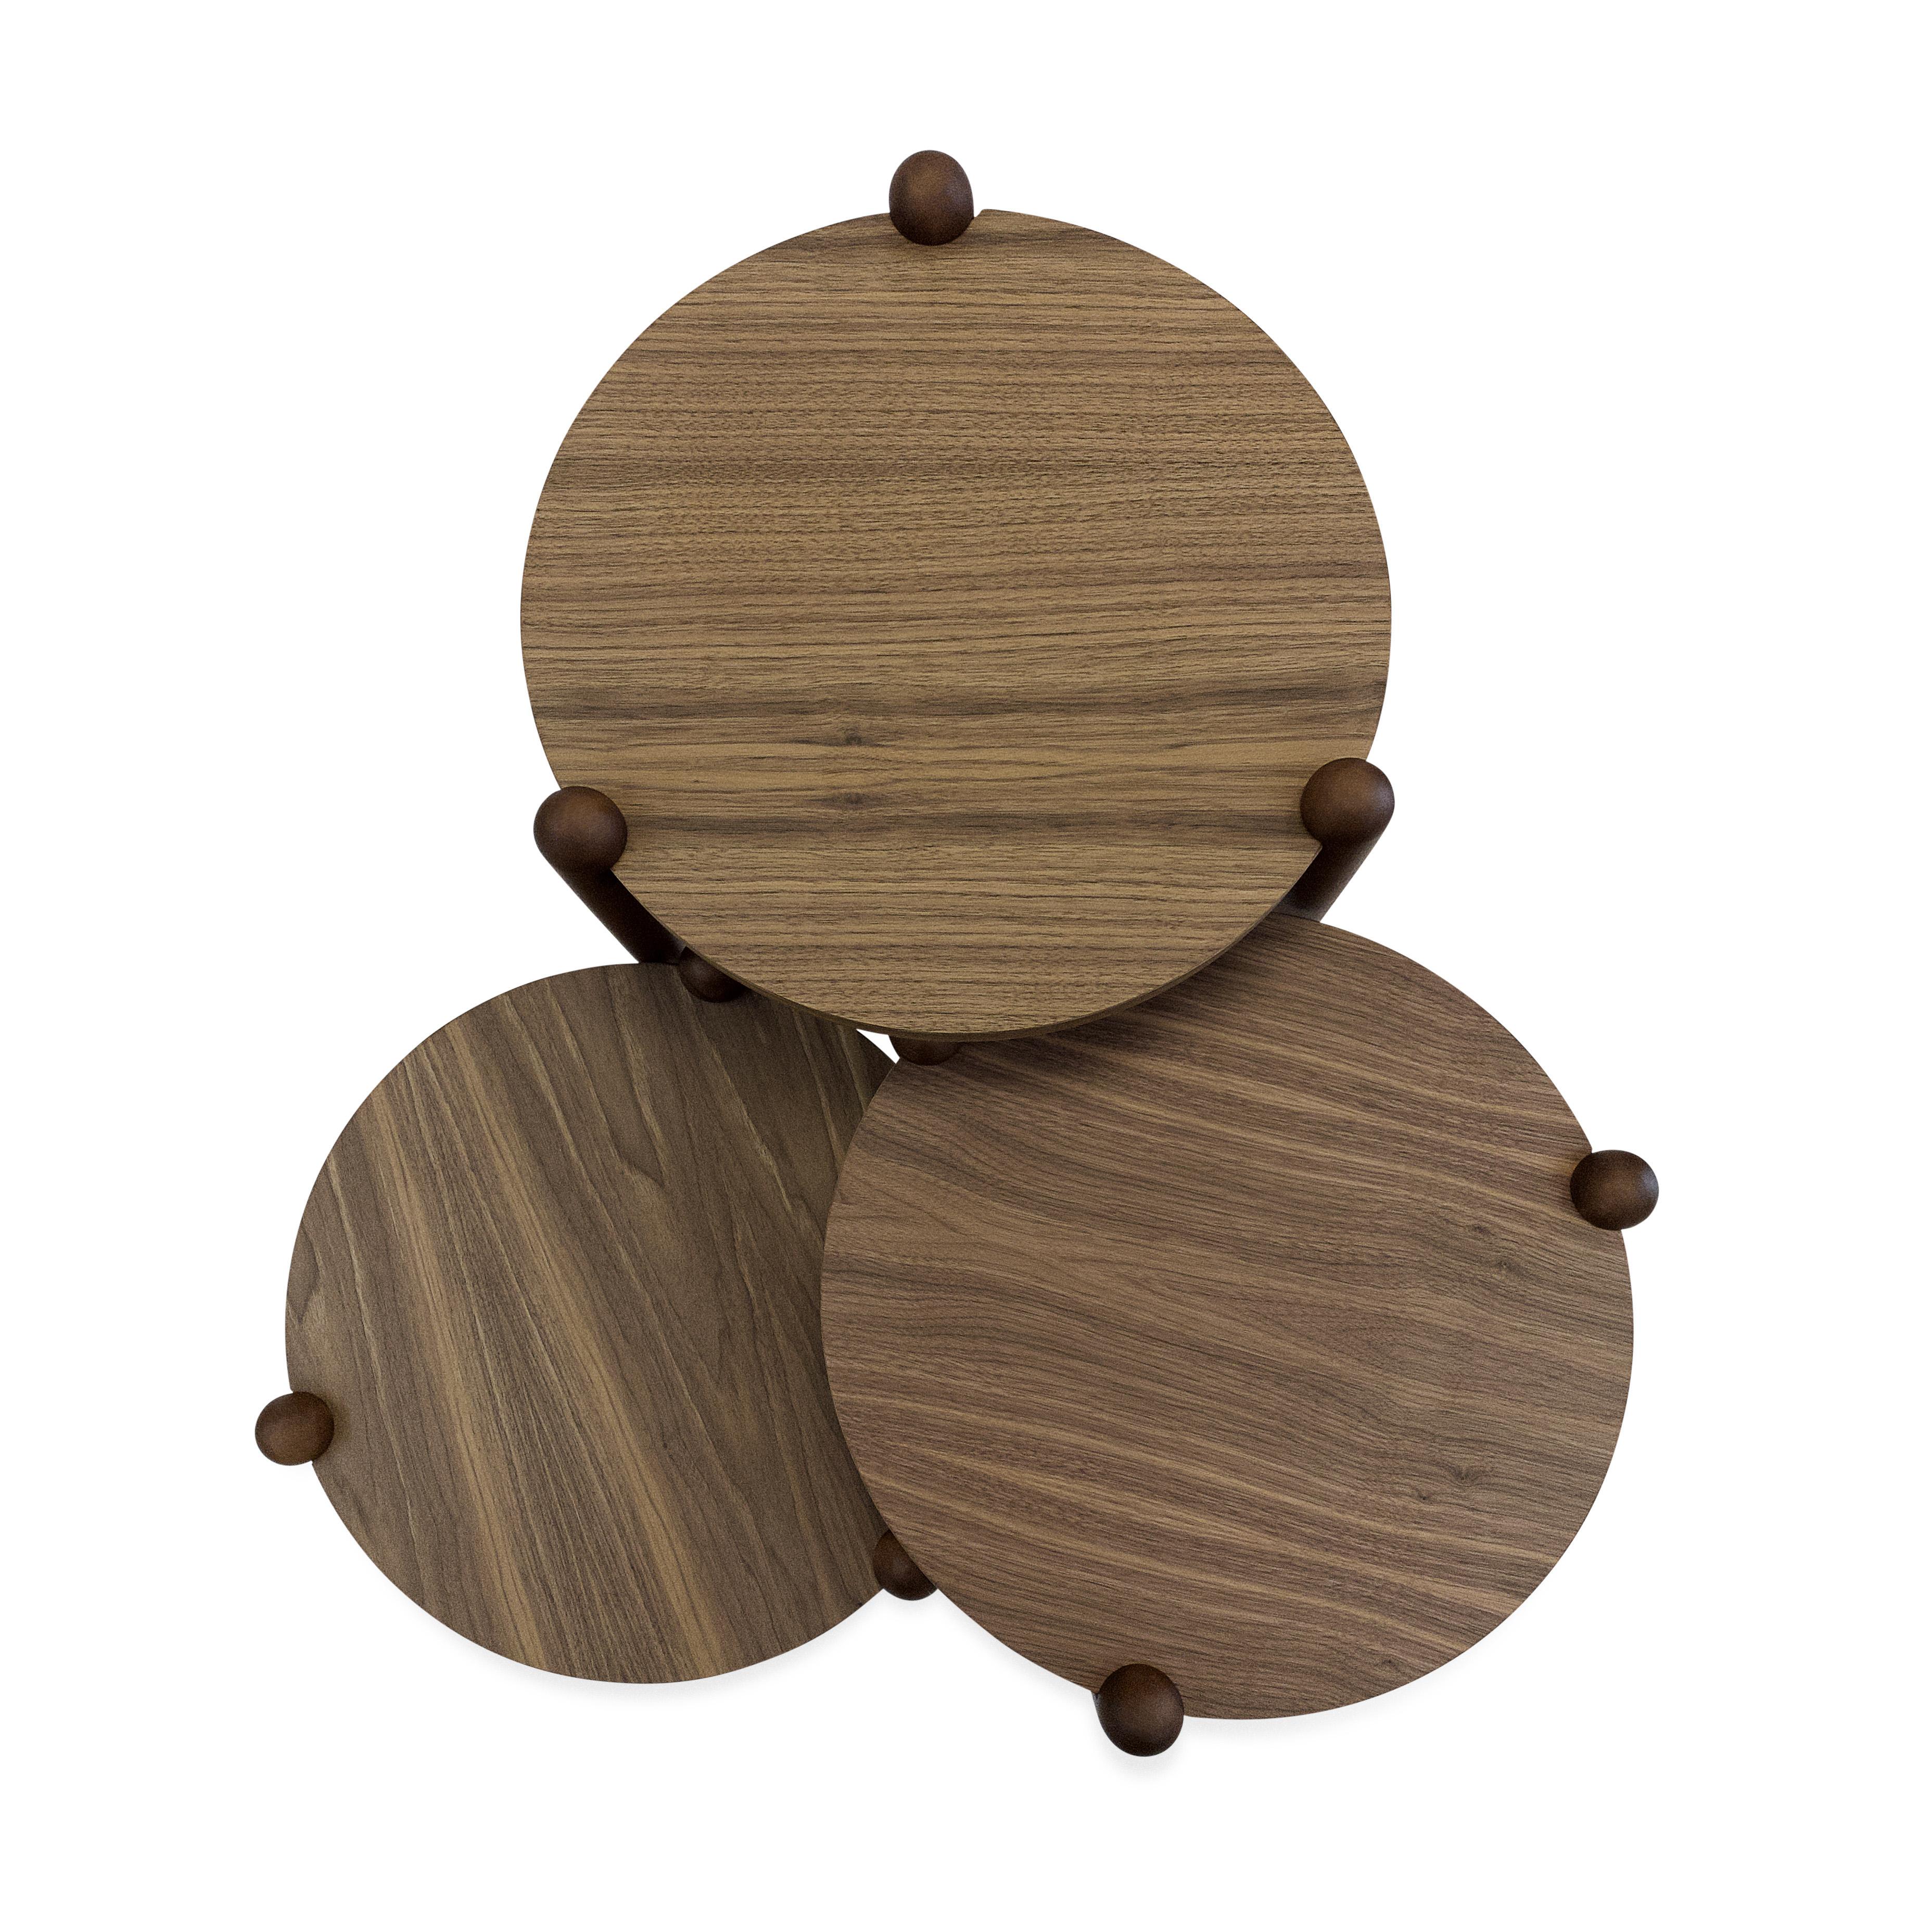 This beautiful set created by our amazing Uultis design team is a set of three occasional tables in a walnut wood finish with cone-shaped feet that gives a retro touch providing a sophisticated style that you will not regret having in your house.